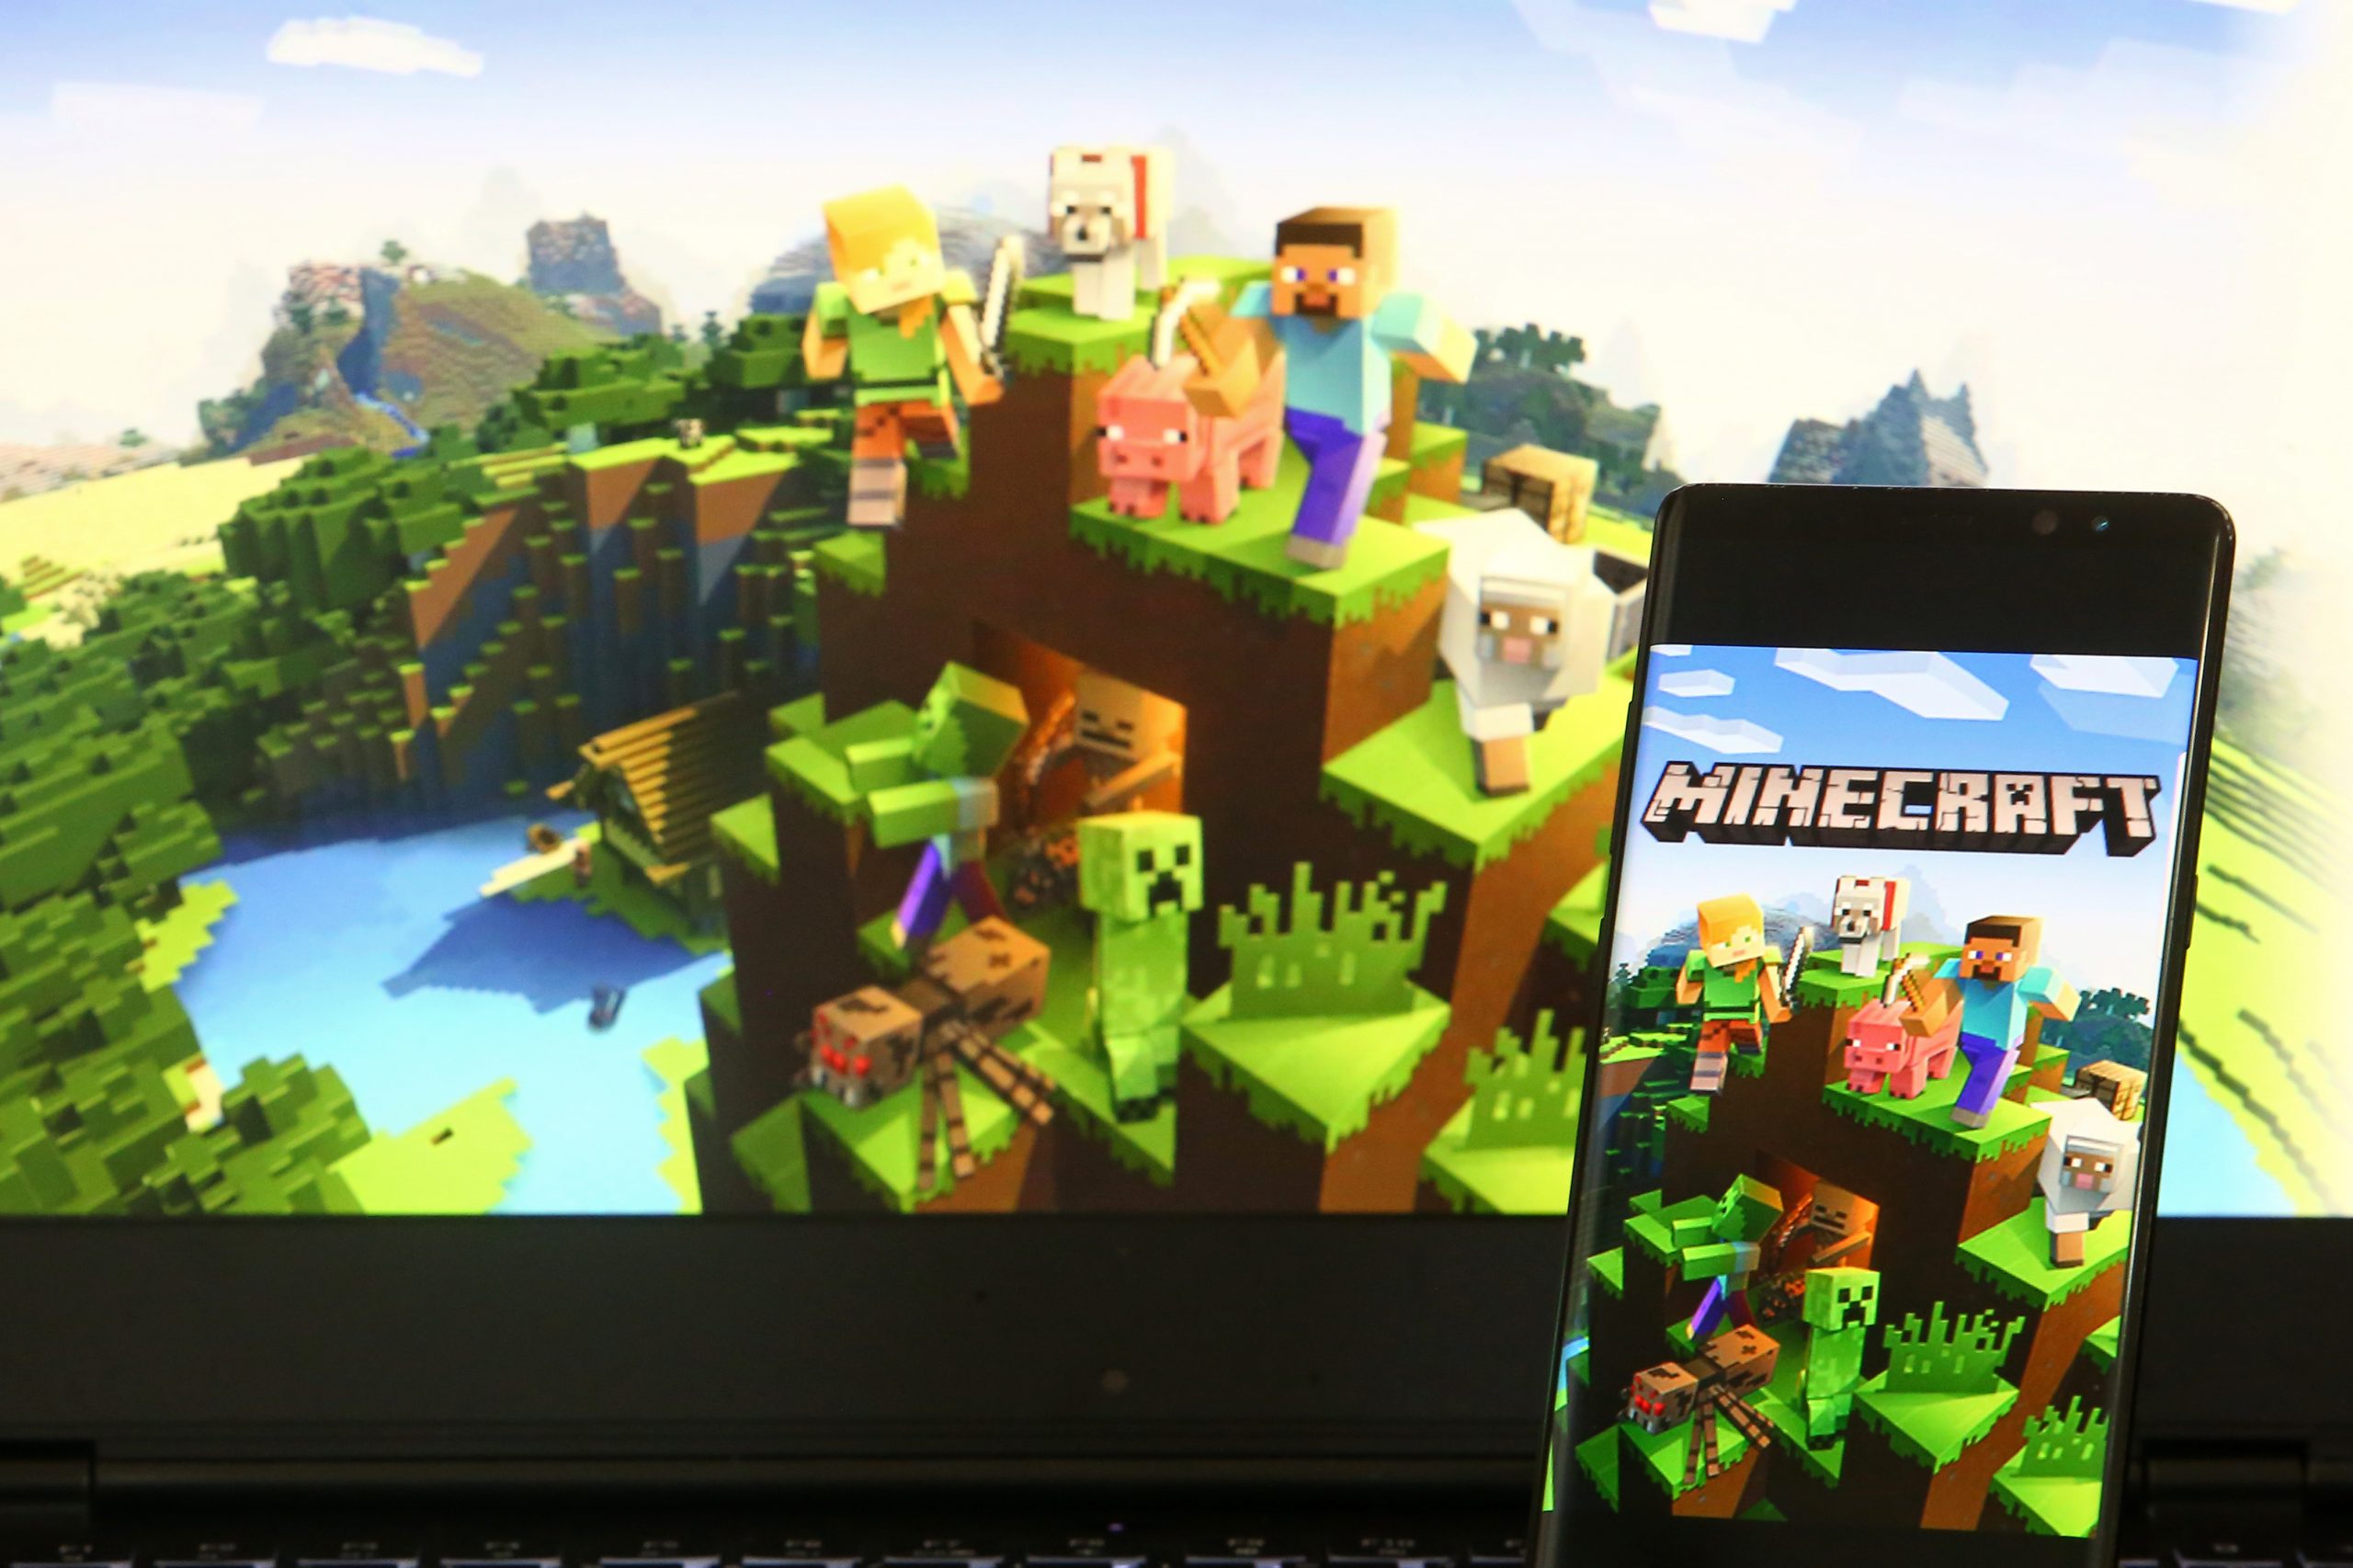 What Parents need to know about MINECRAFT